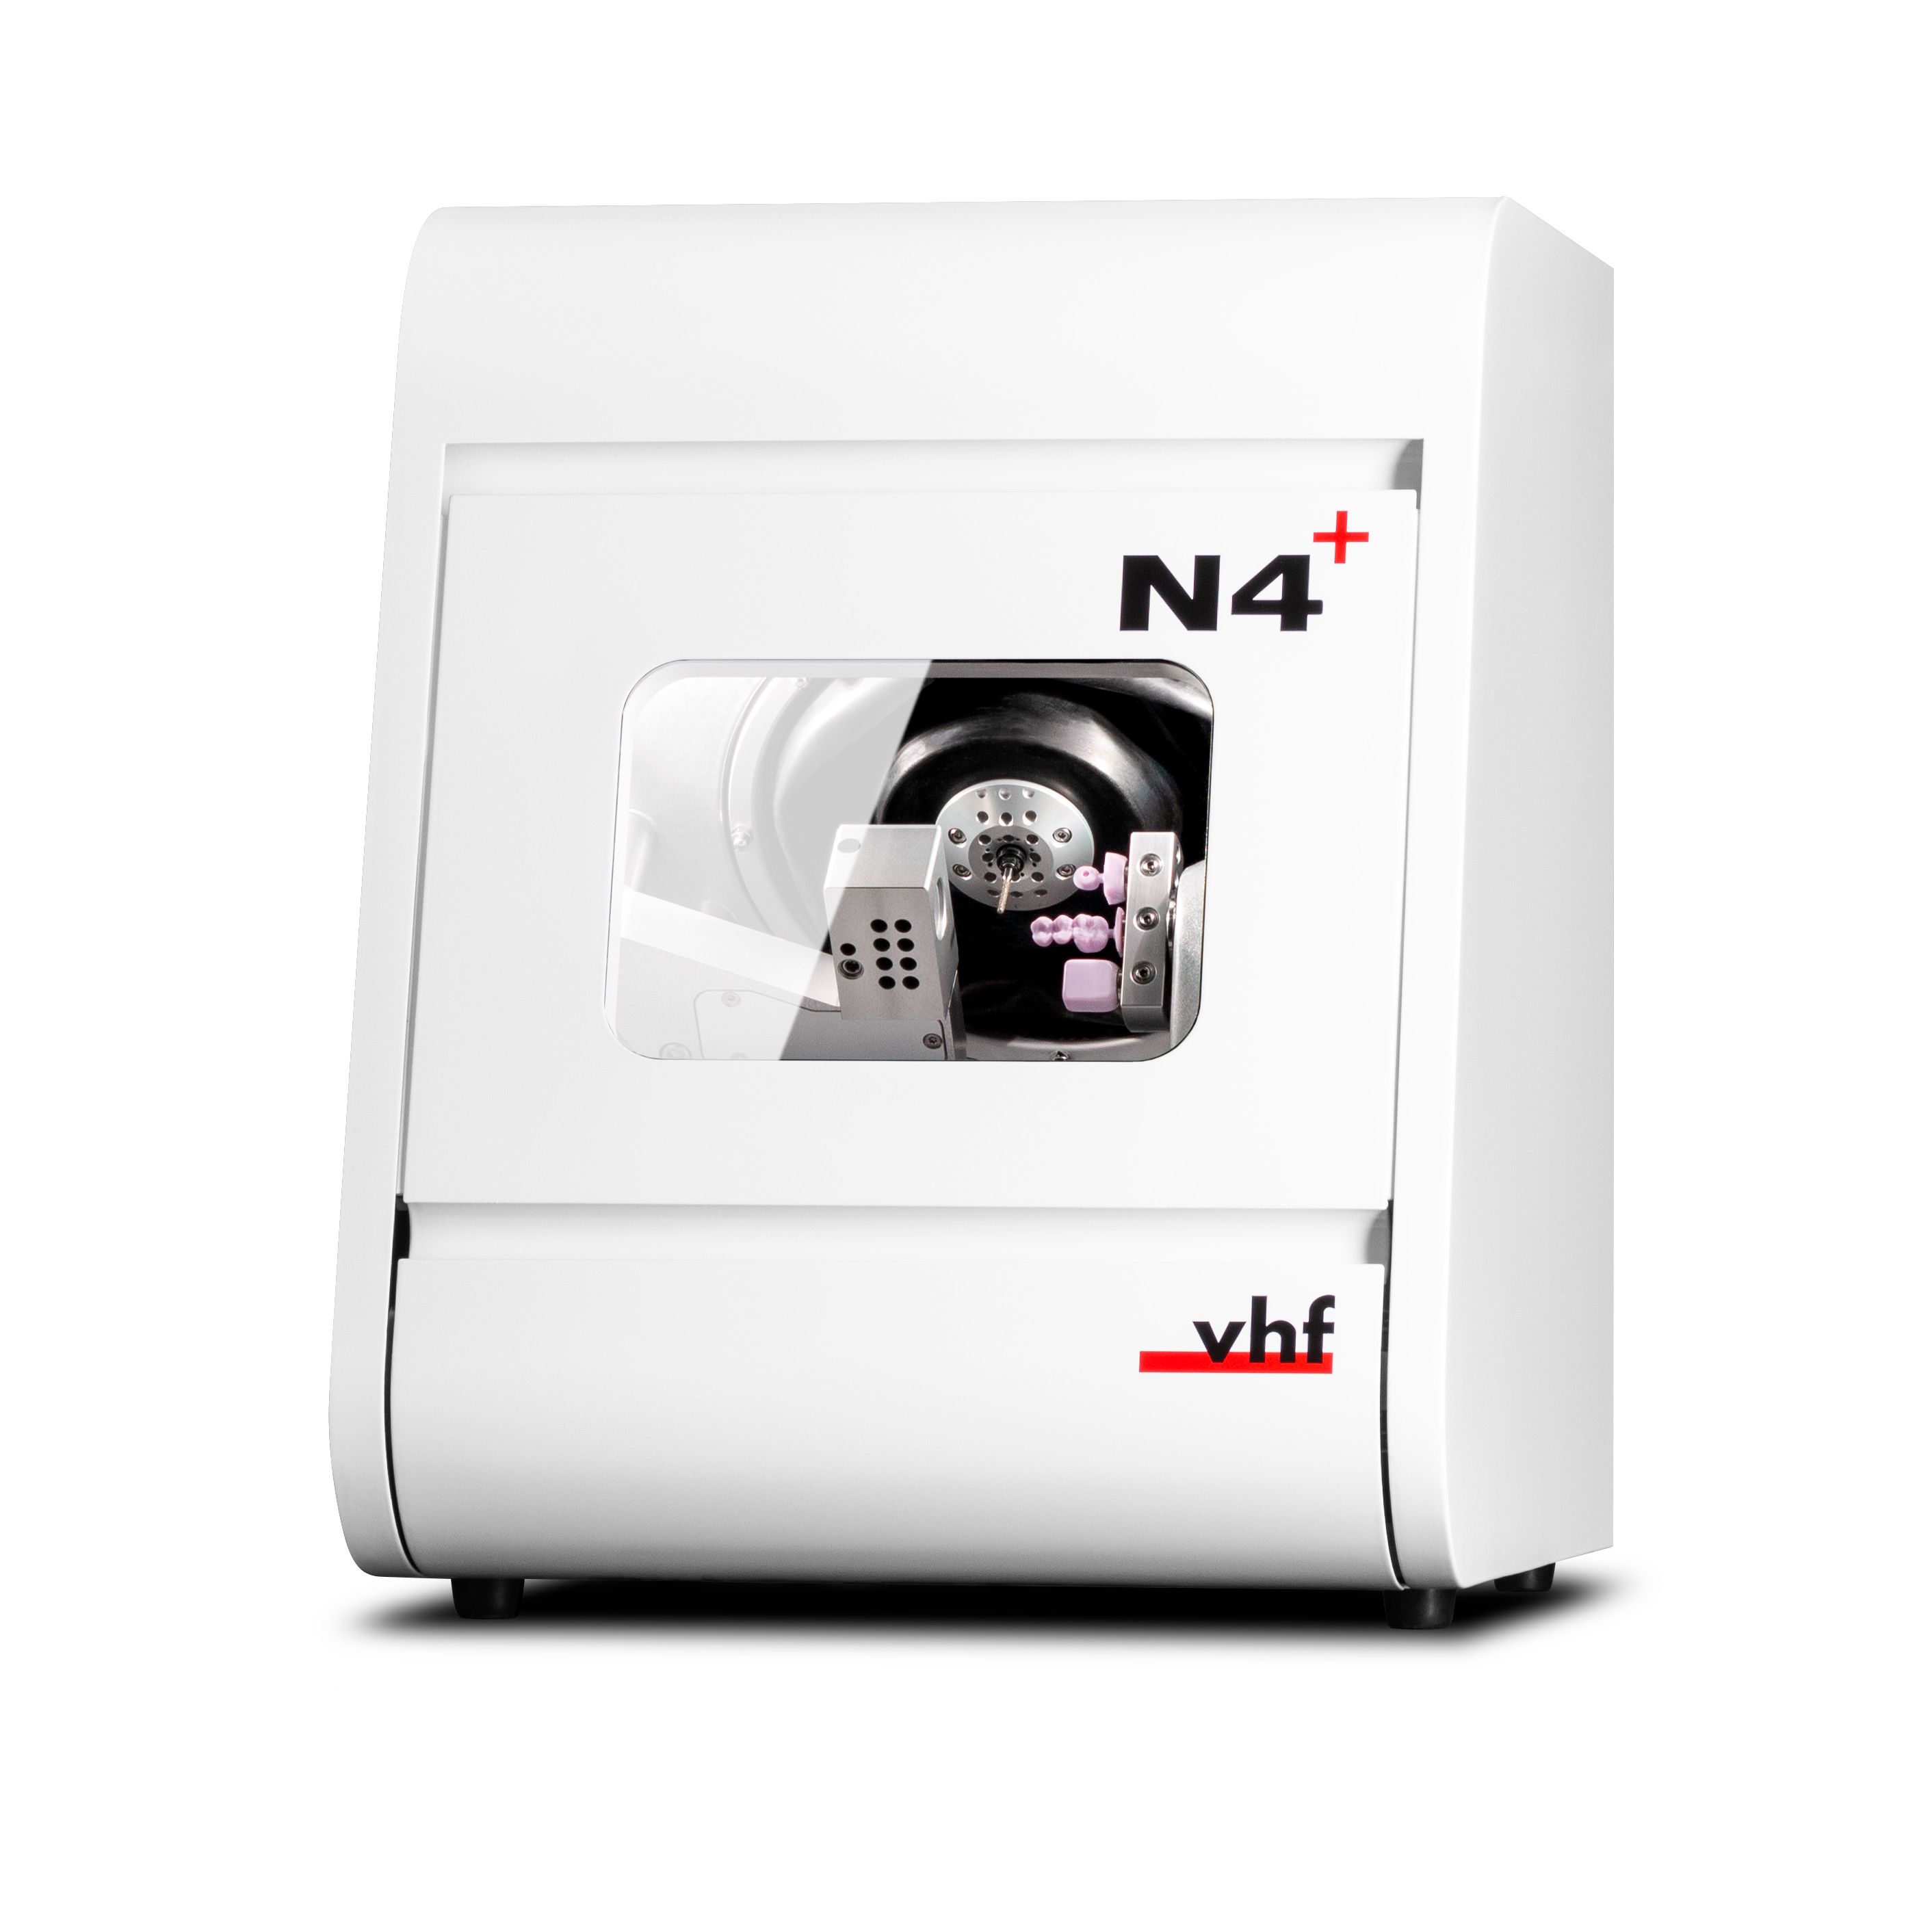 The N4+ is a wet processing machine for milling and grinding glass ceramic, composite and zirconia blocks as well as titanium abutments